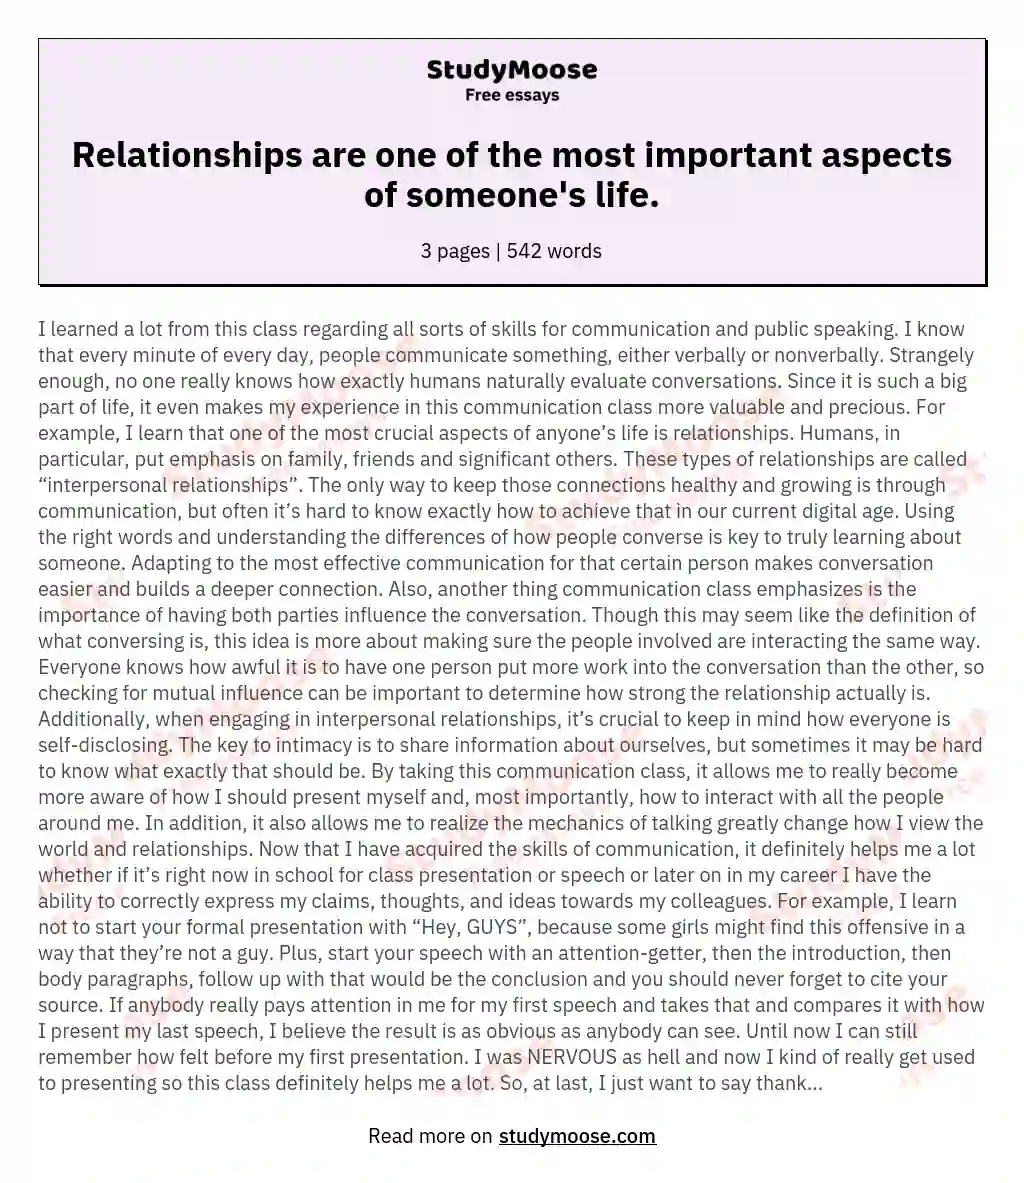 Relationships are one of the most important aspects of someone's life. essay